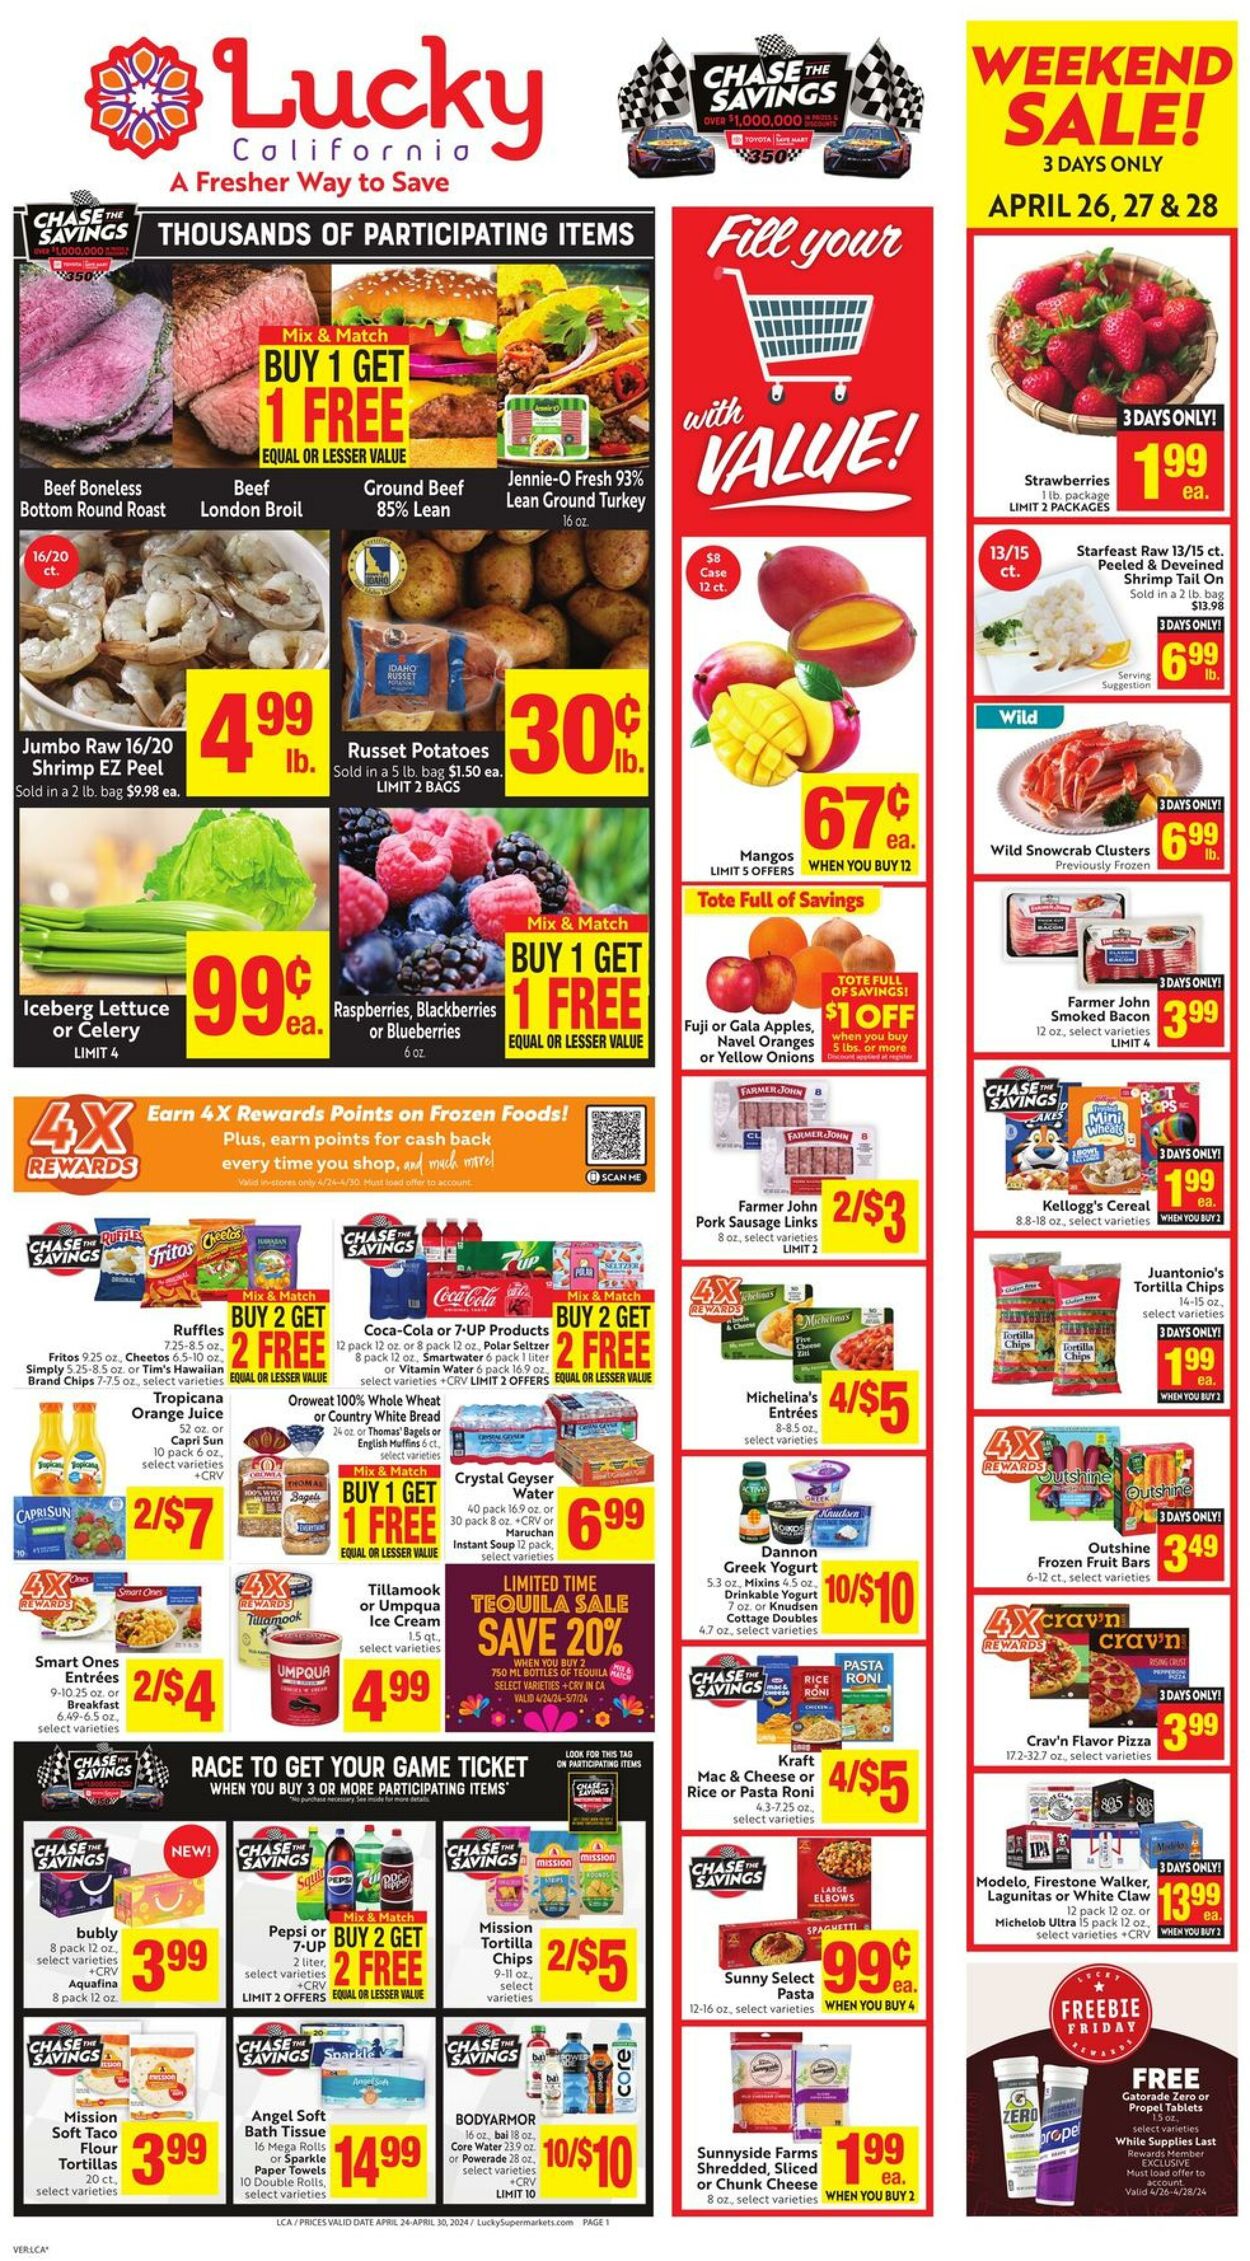 Lucky Supermarkets Promotional weekly ads